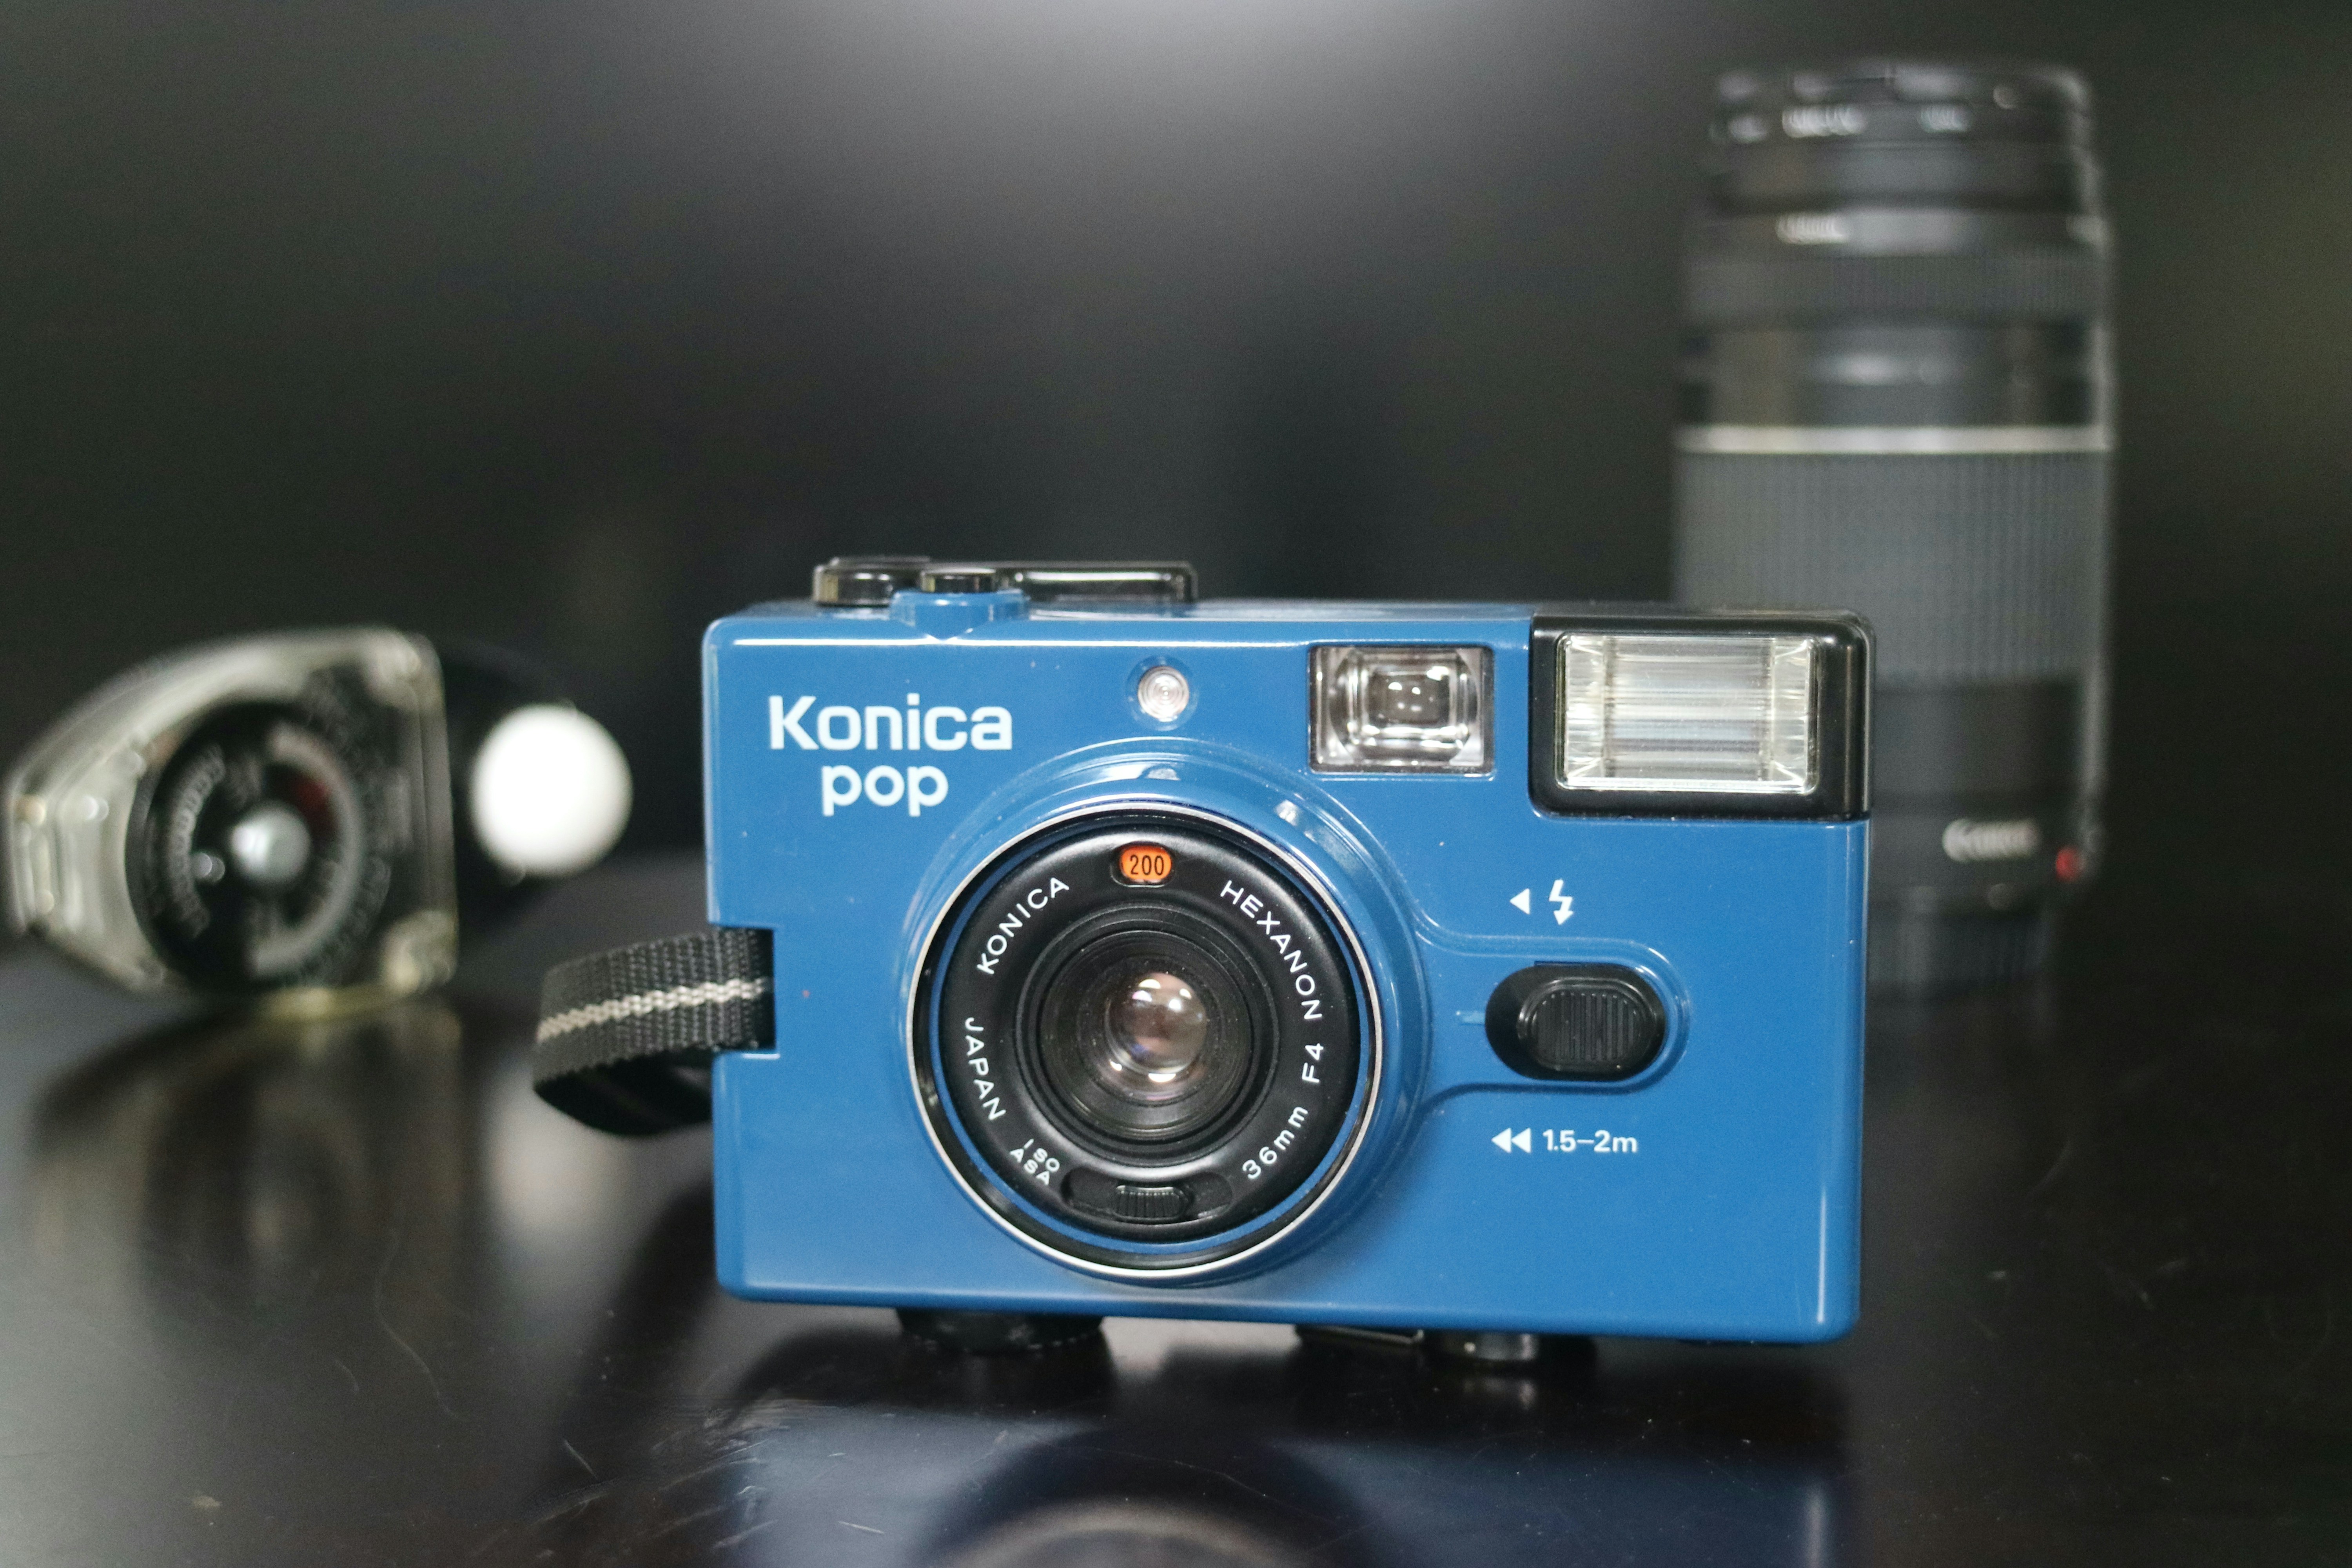 A still life photo of a Konica pop camera from the 1980s.